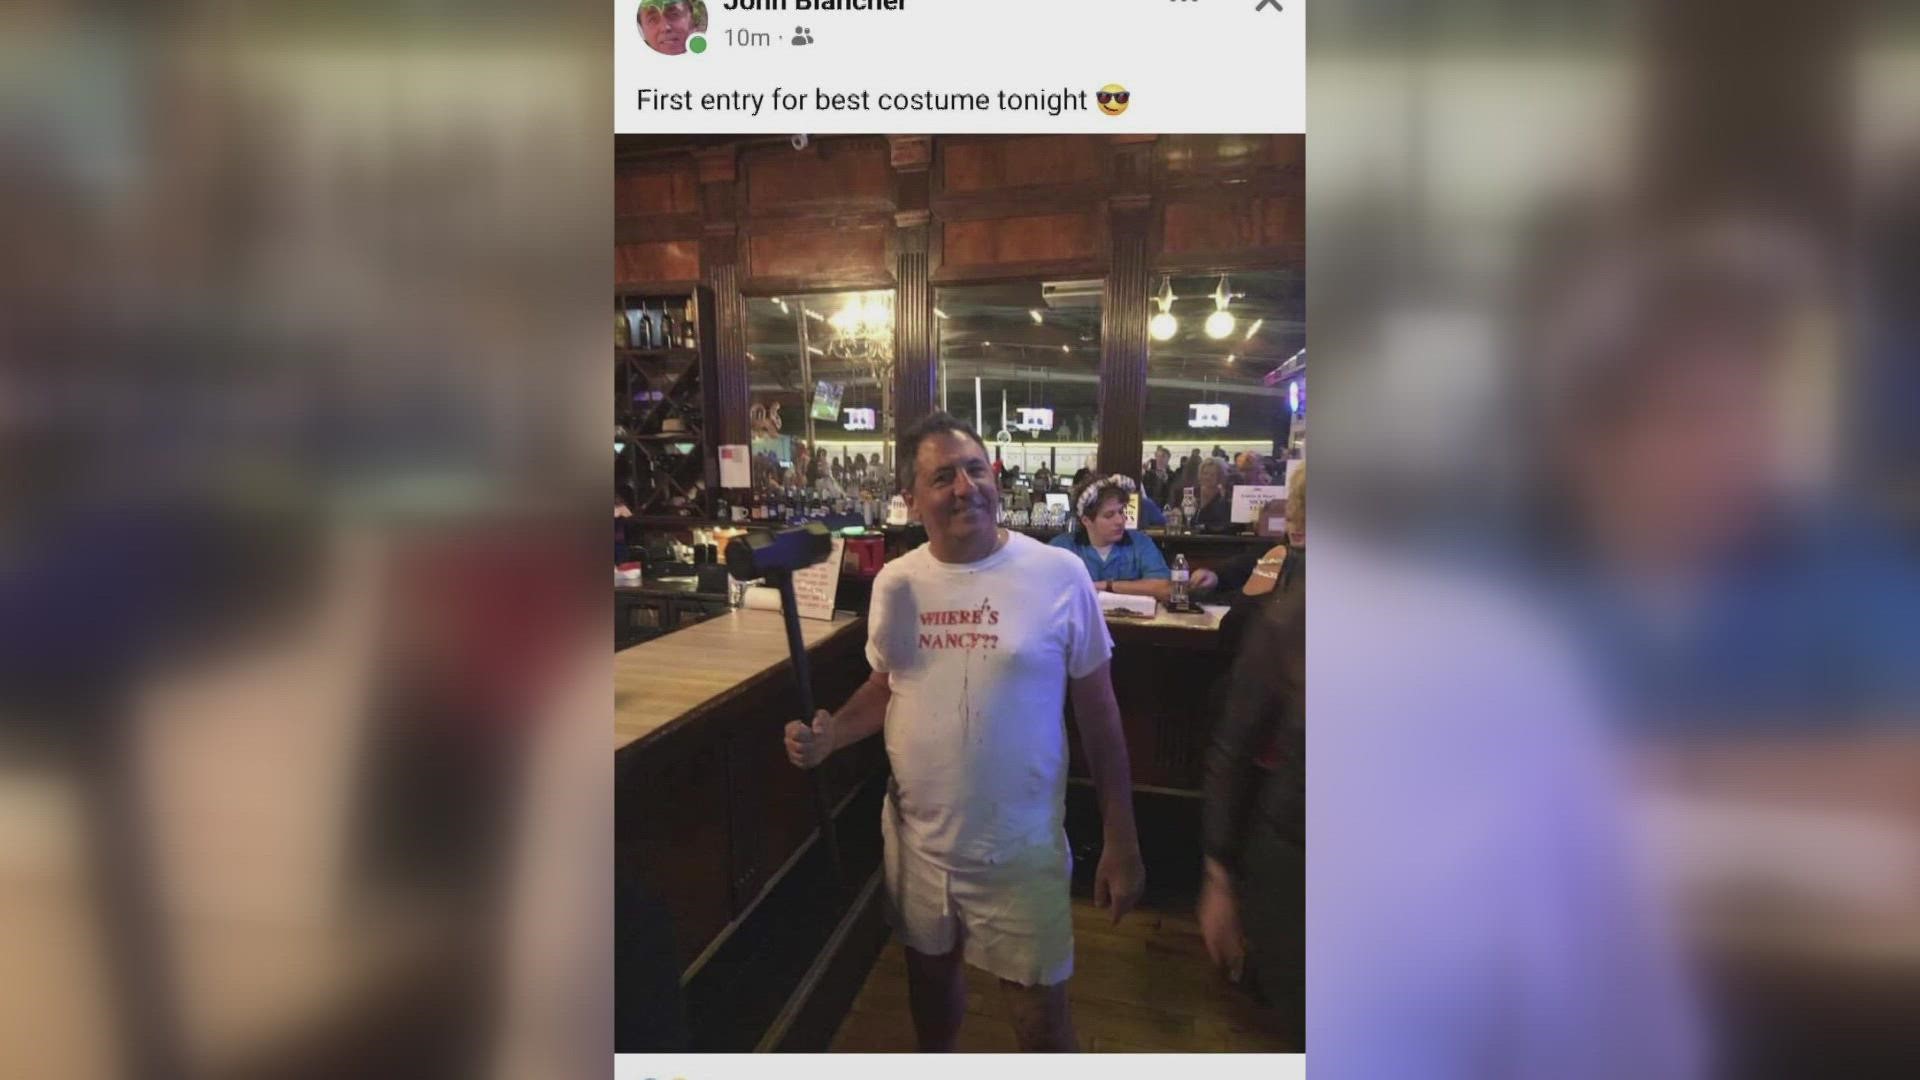 The Bowling Alley's owner has responded to the criticism of his social media post.